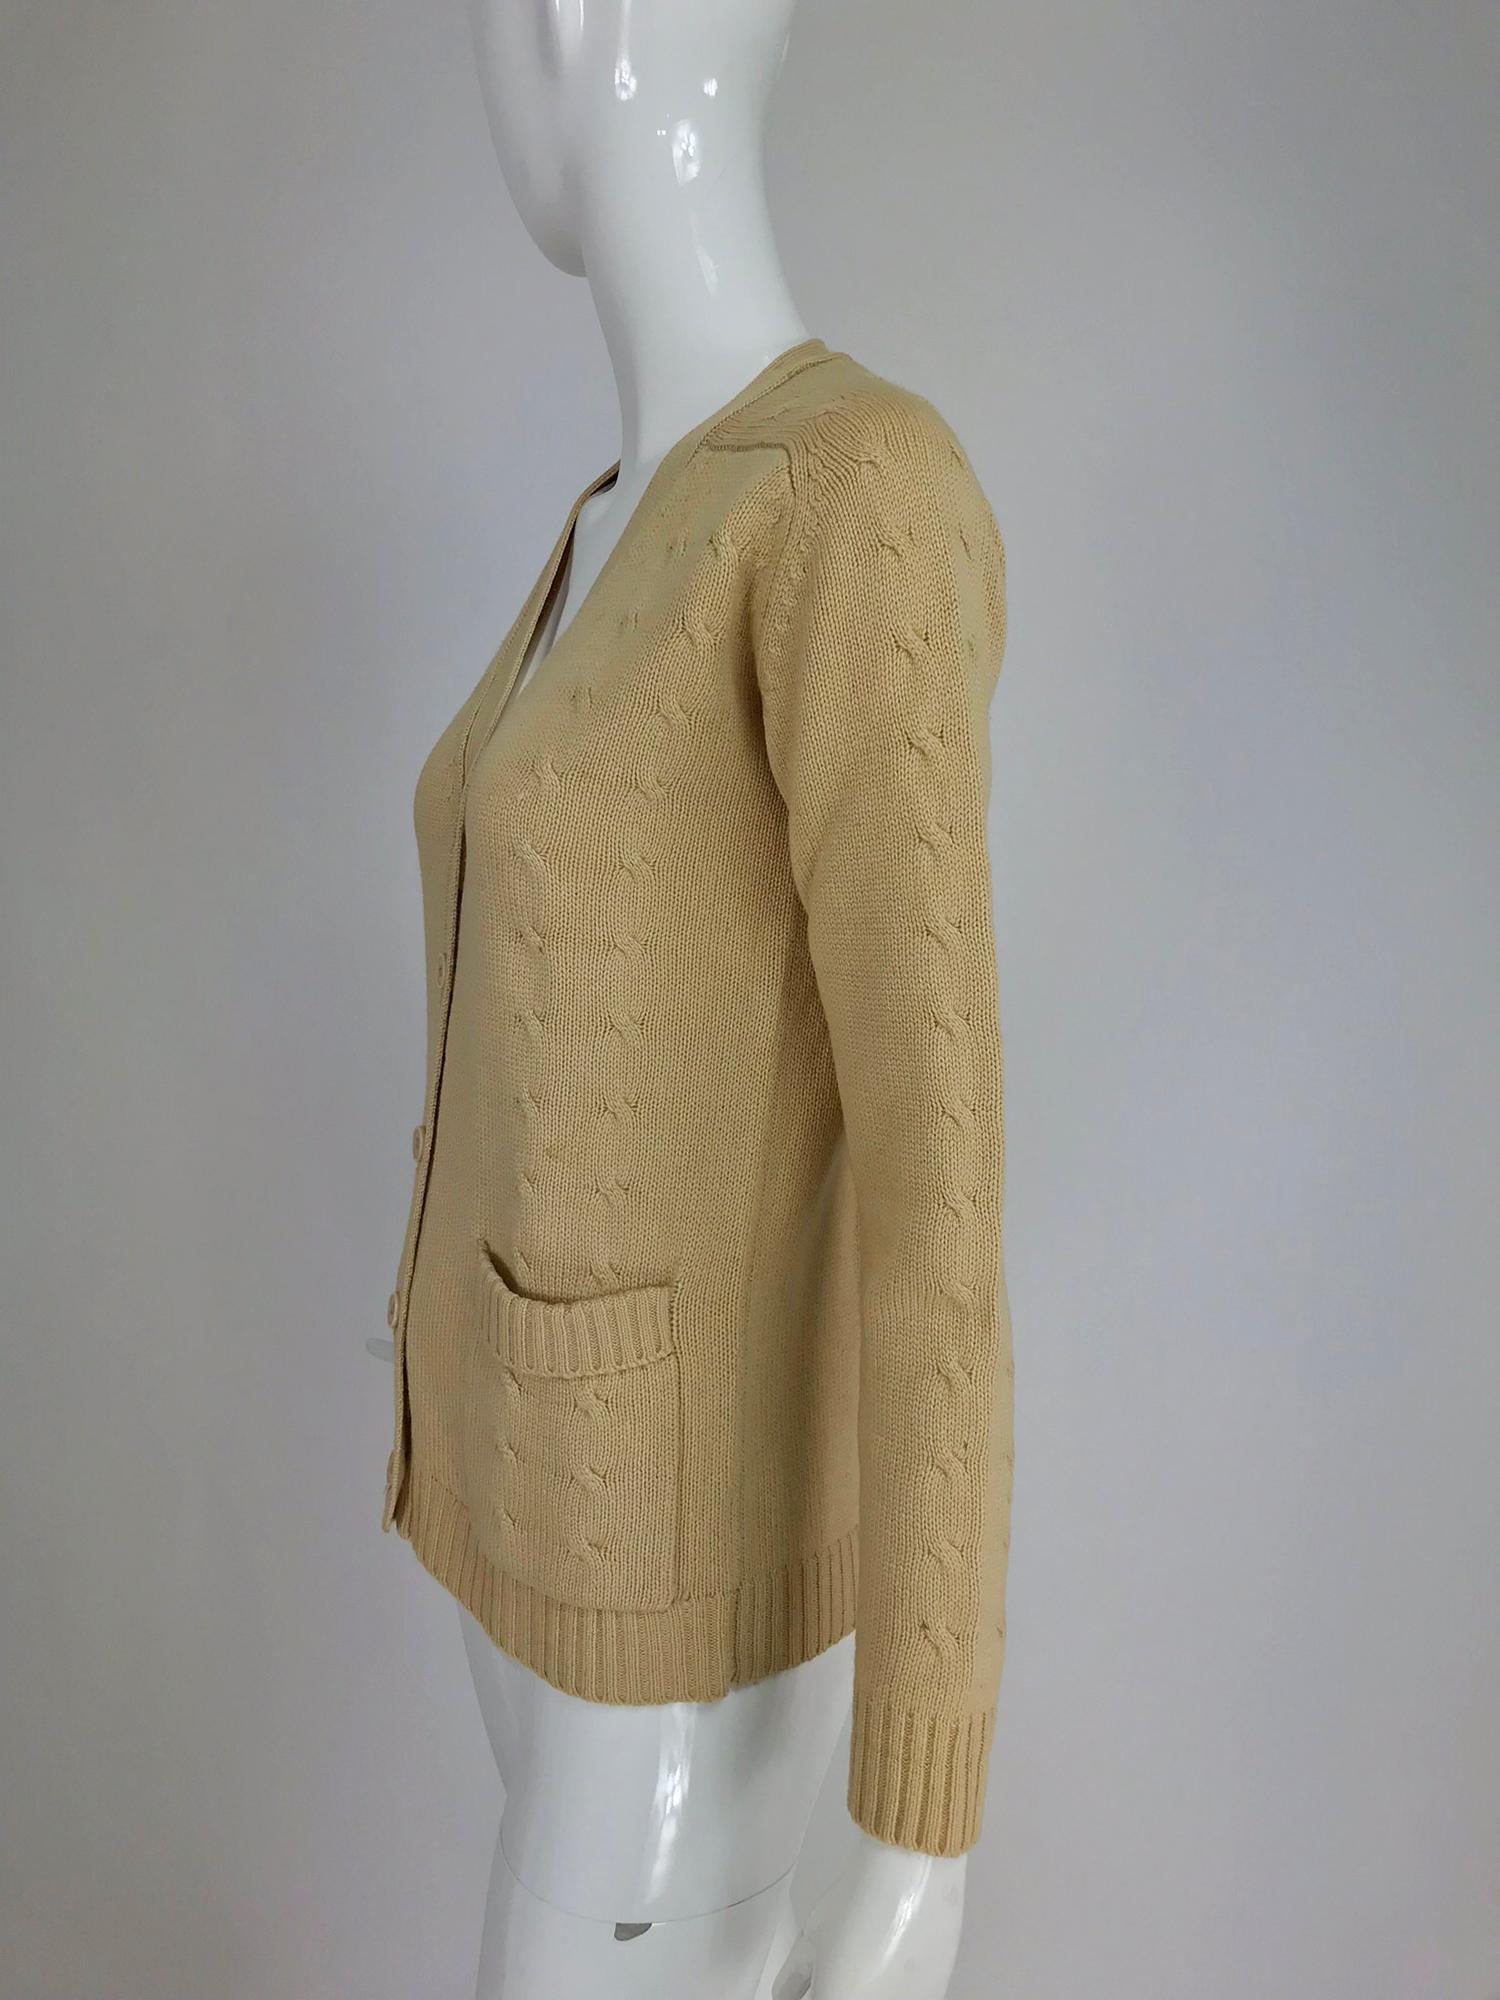 Hermes tan cashmere silk cable knit cardigan sweater 1960s For Sale 3